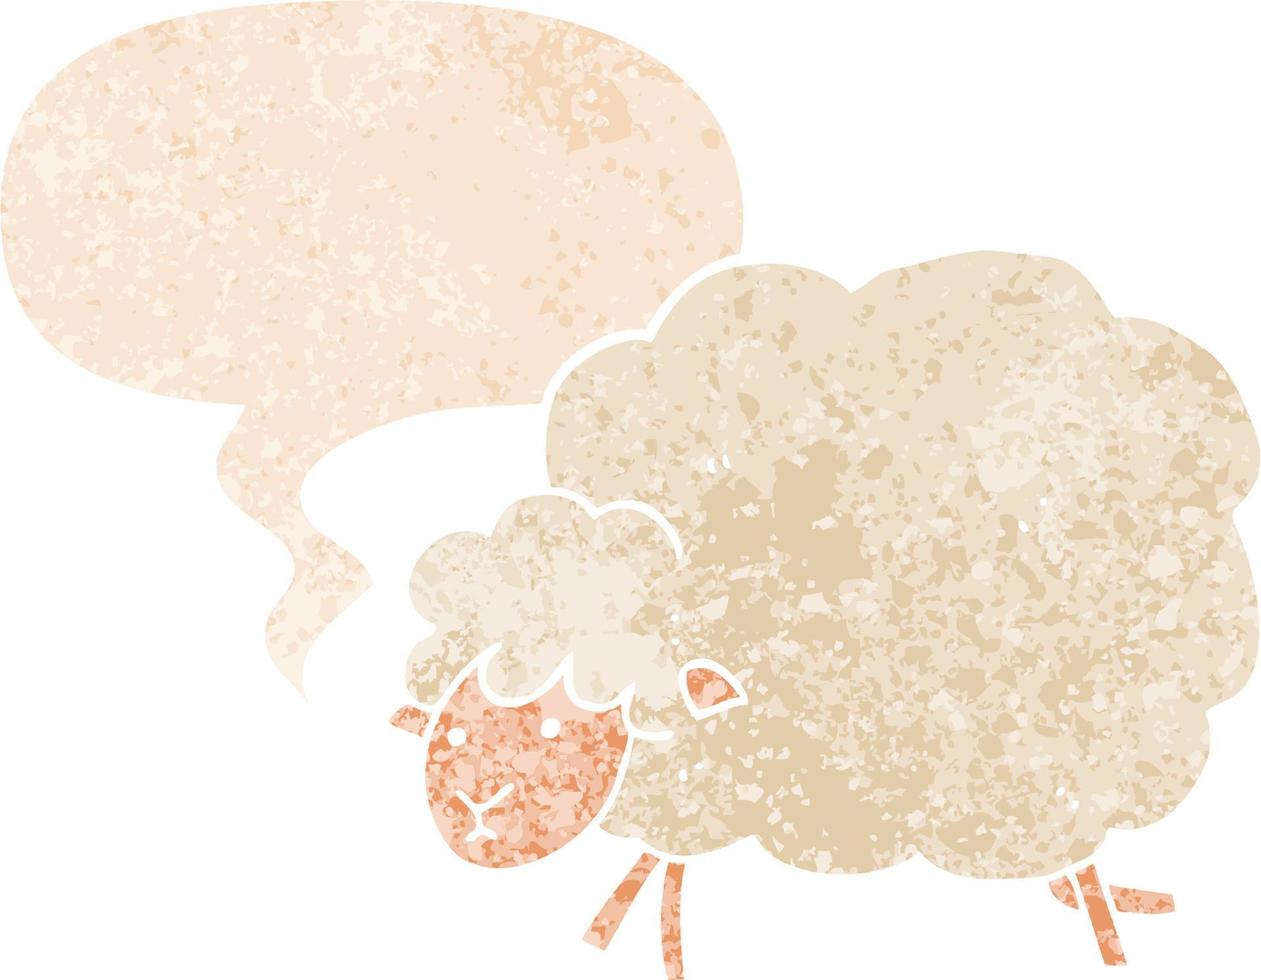 cartoon sheep and speech bubble in retro textured style vector